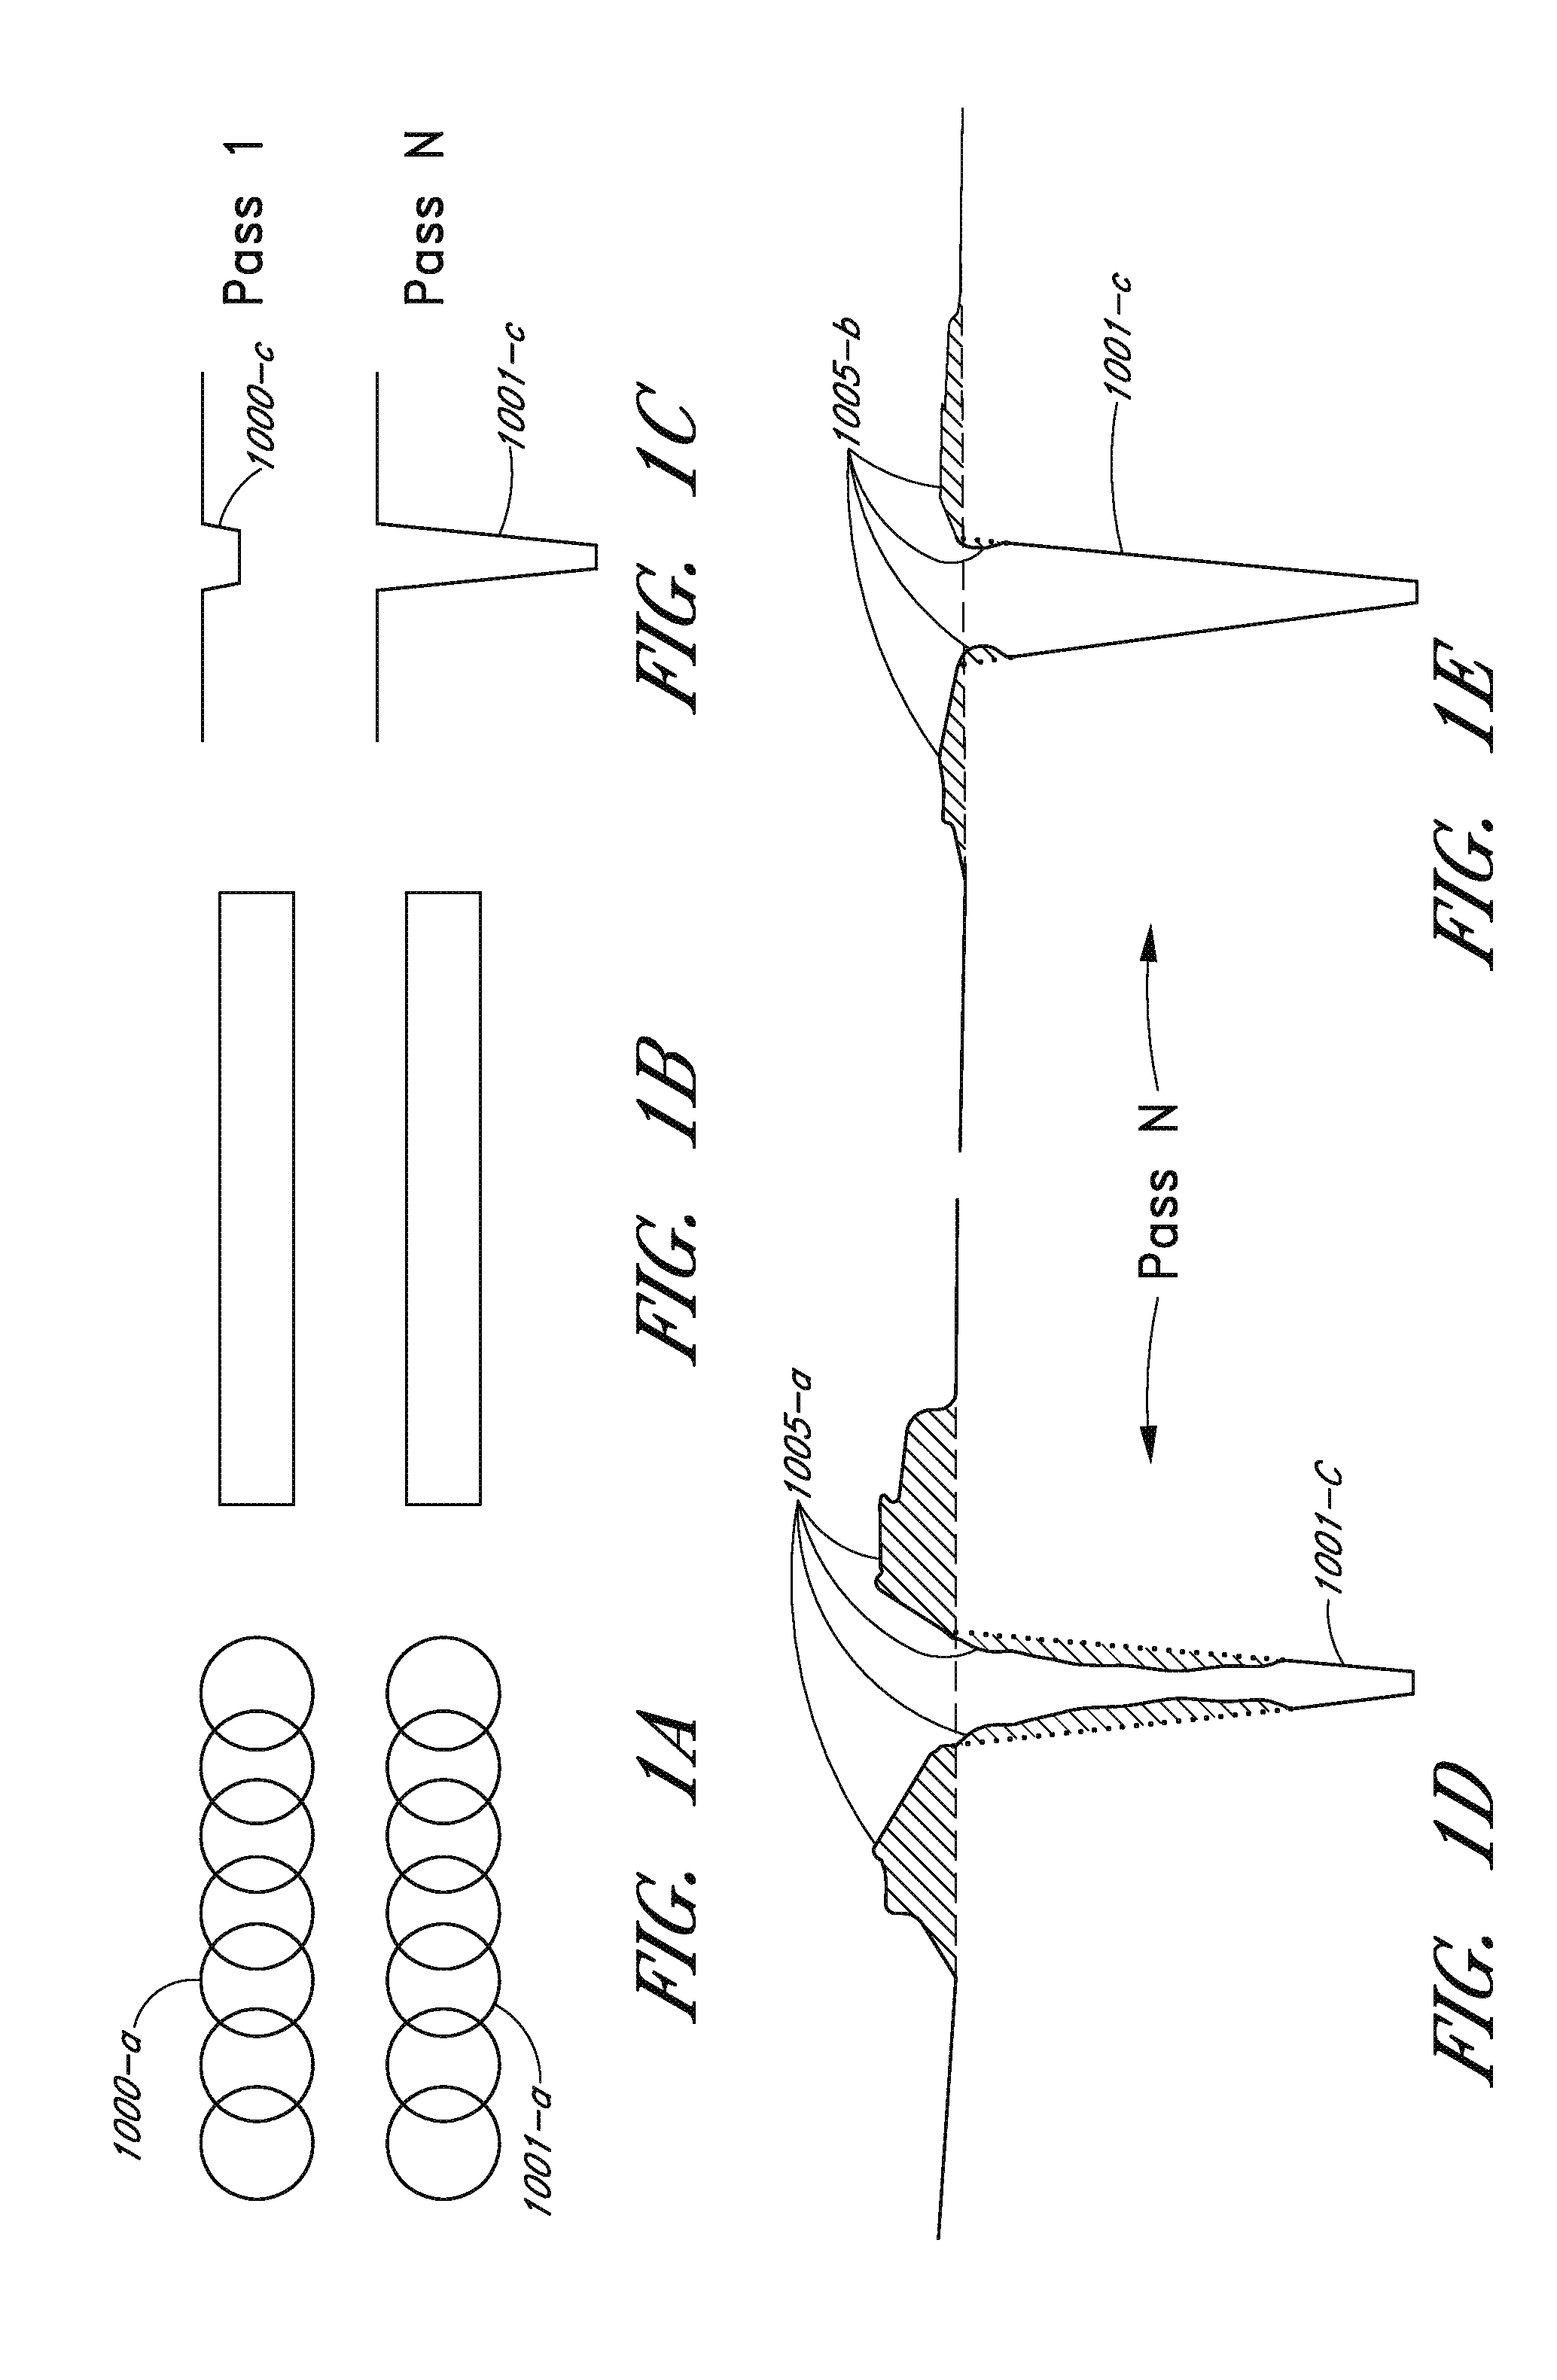 Laser-based material processing apparatus and methods